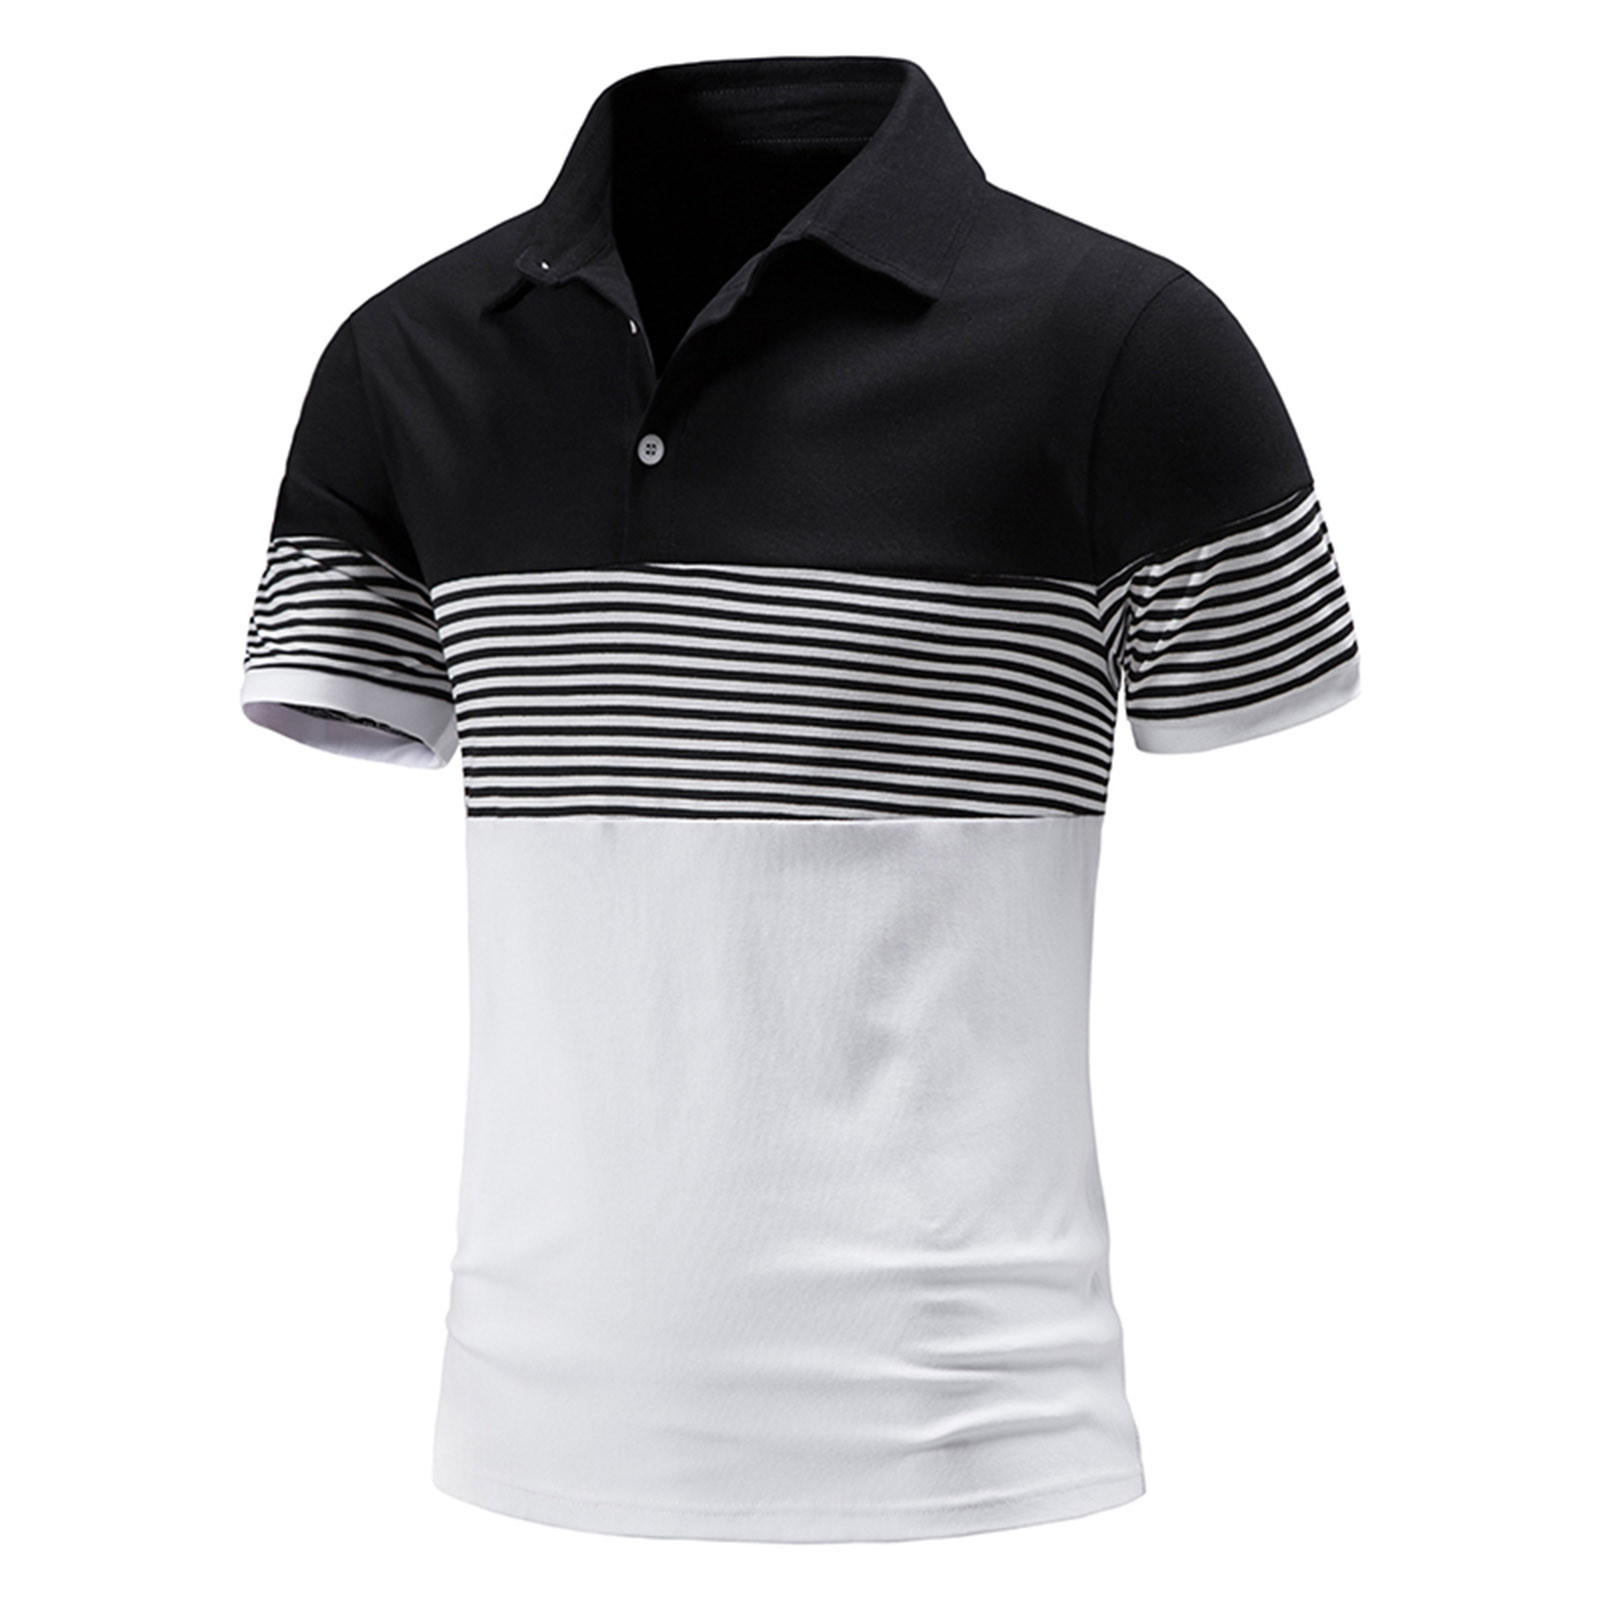 Dovford Muscle Polo Shirts For Men Slim Fit Short Sleeve Golf Shirts ...